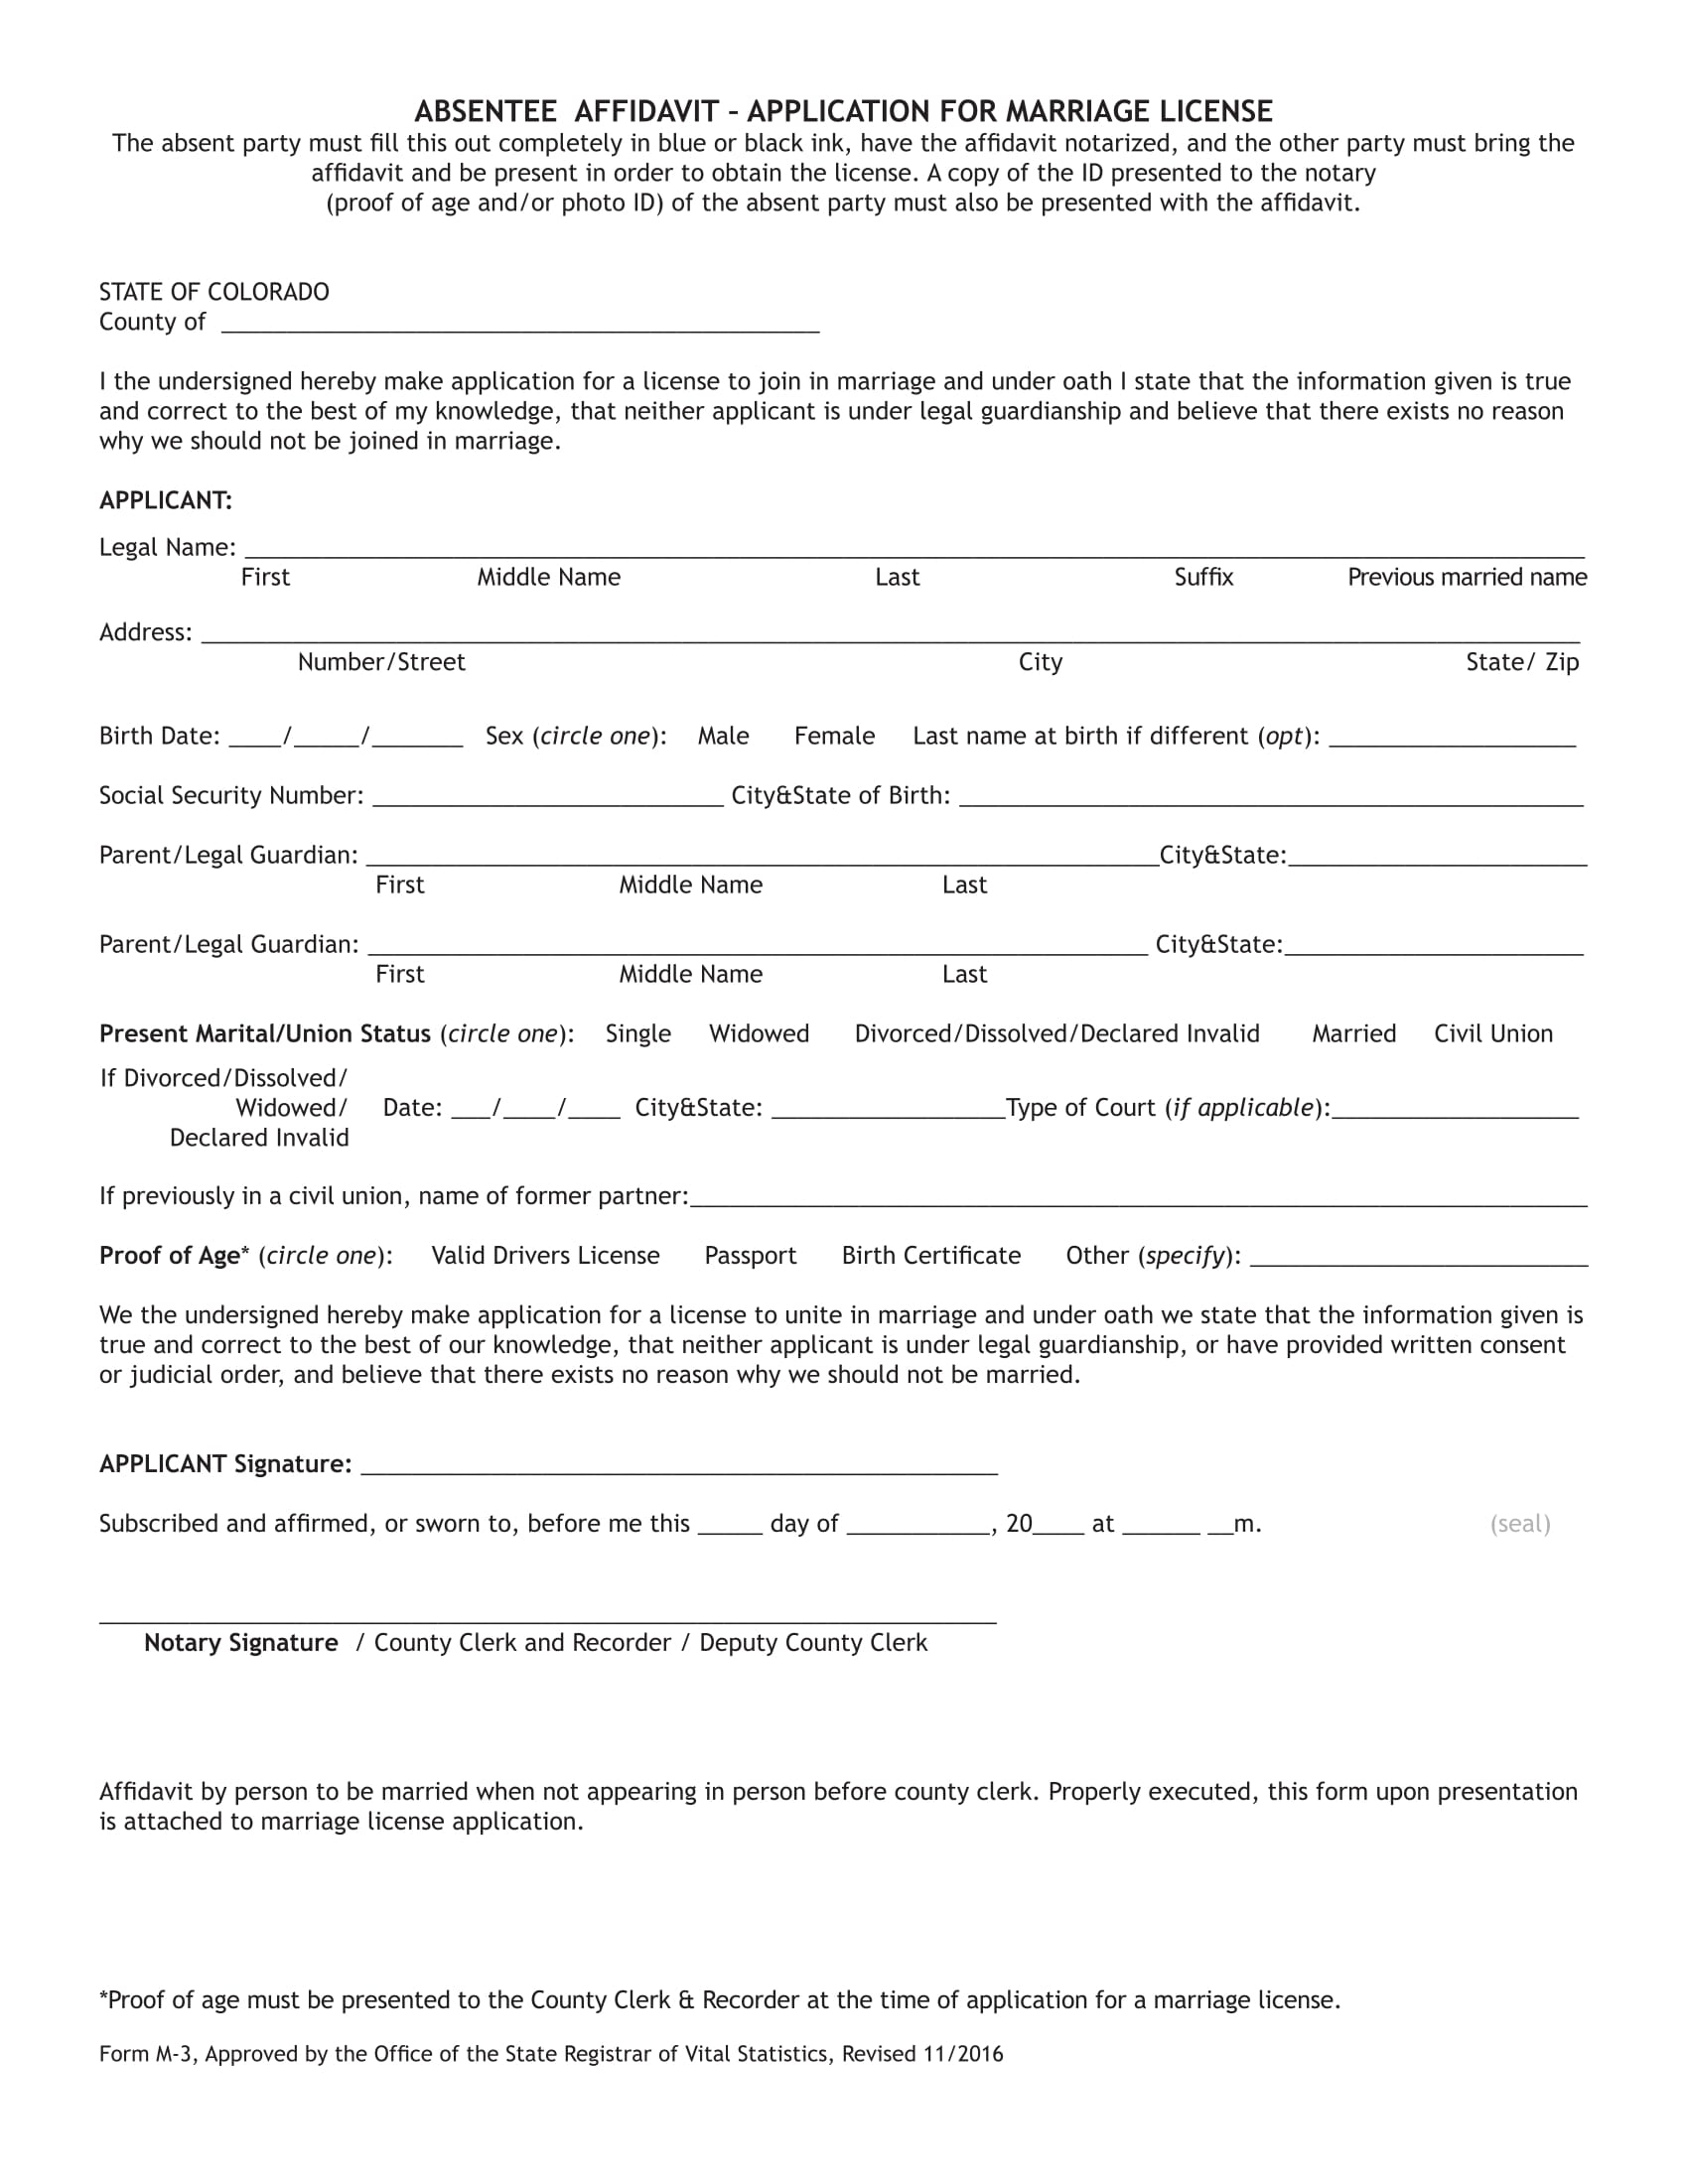 marriage license absentee application form 1